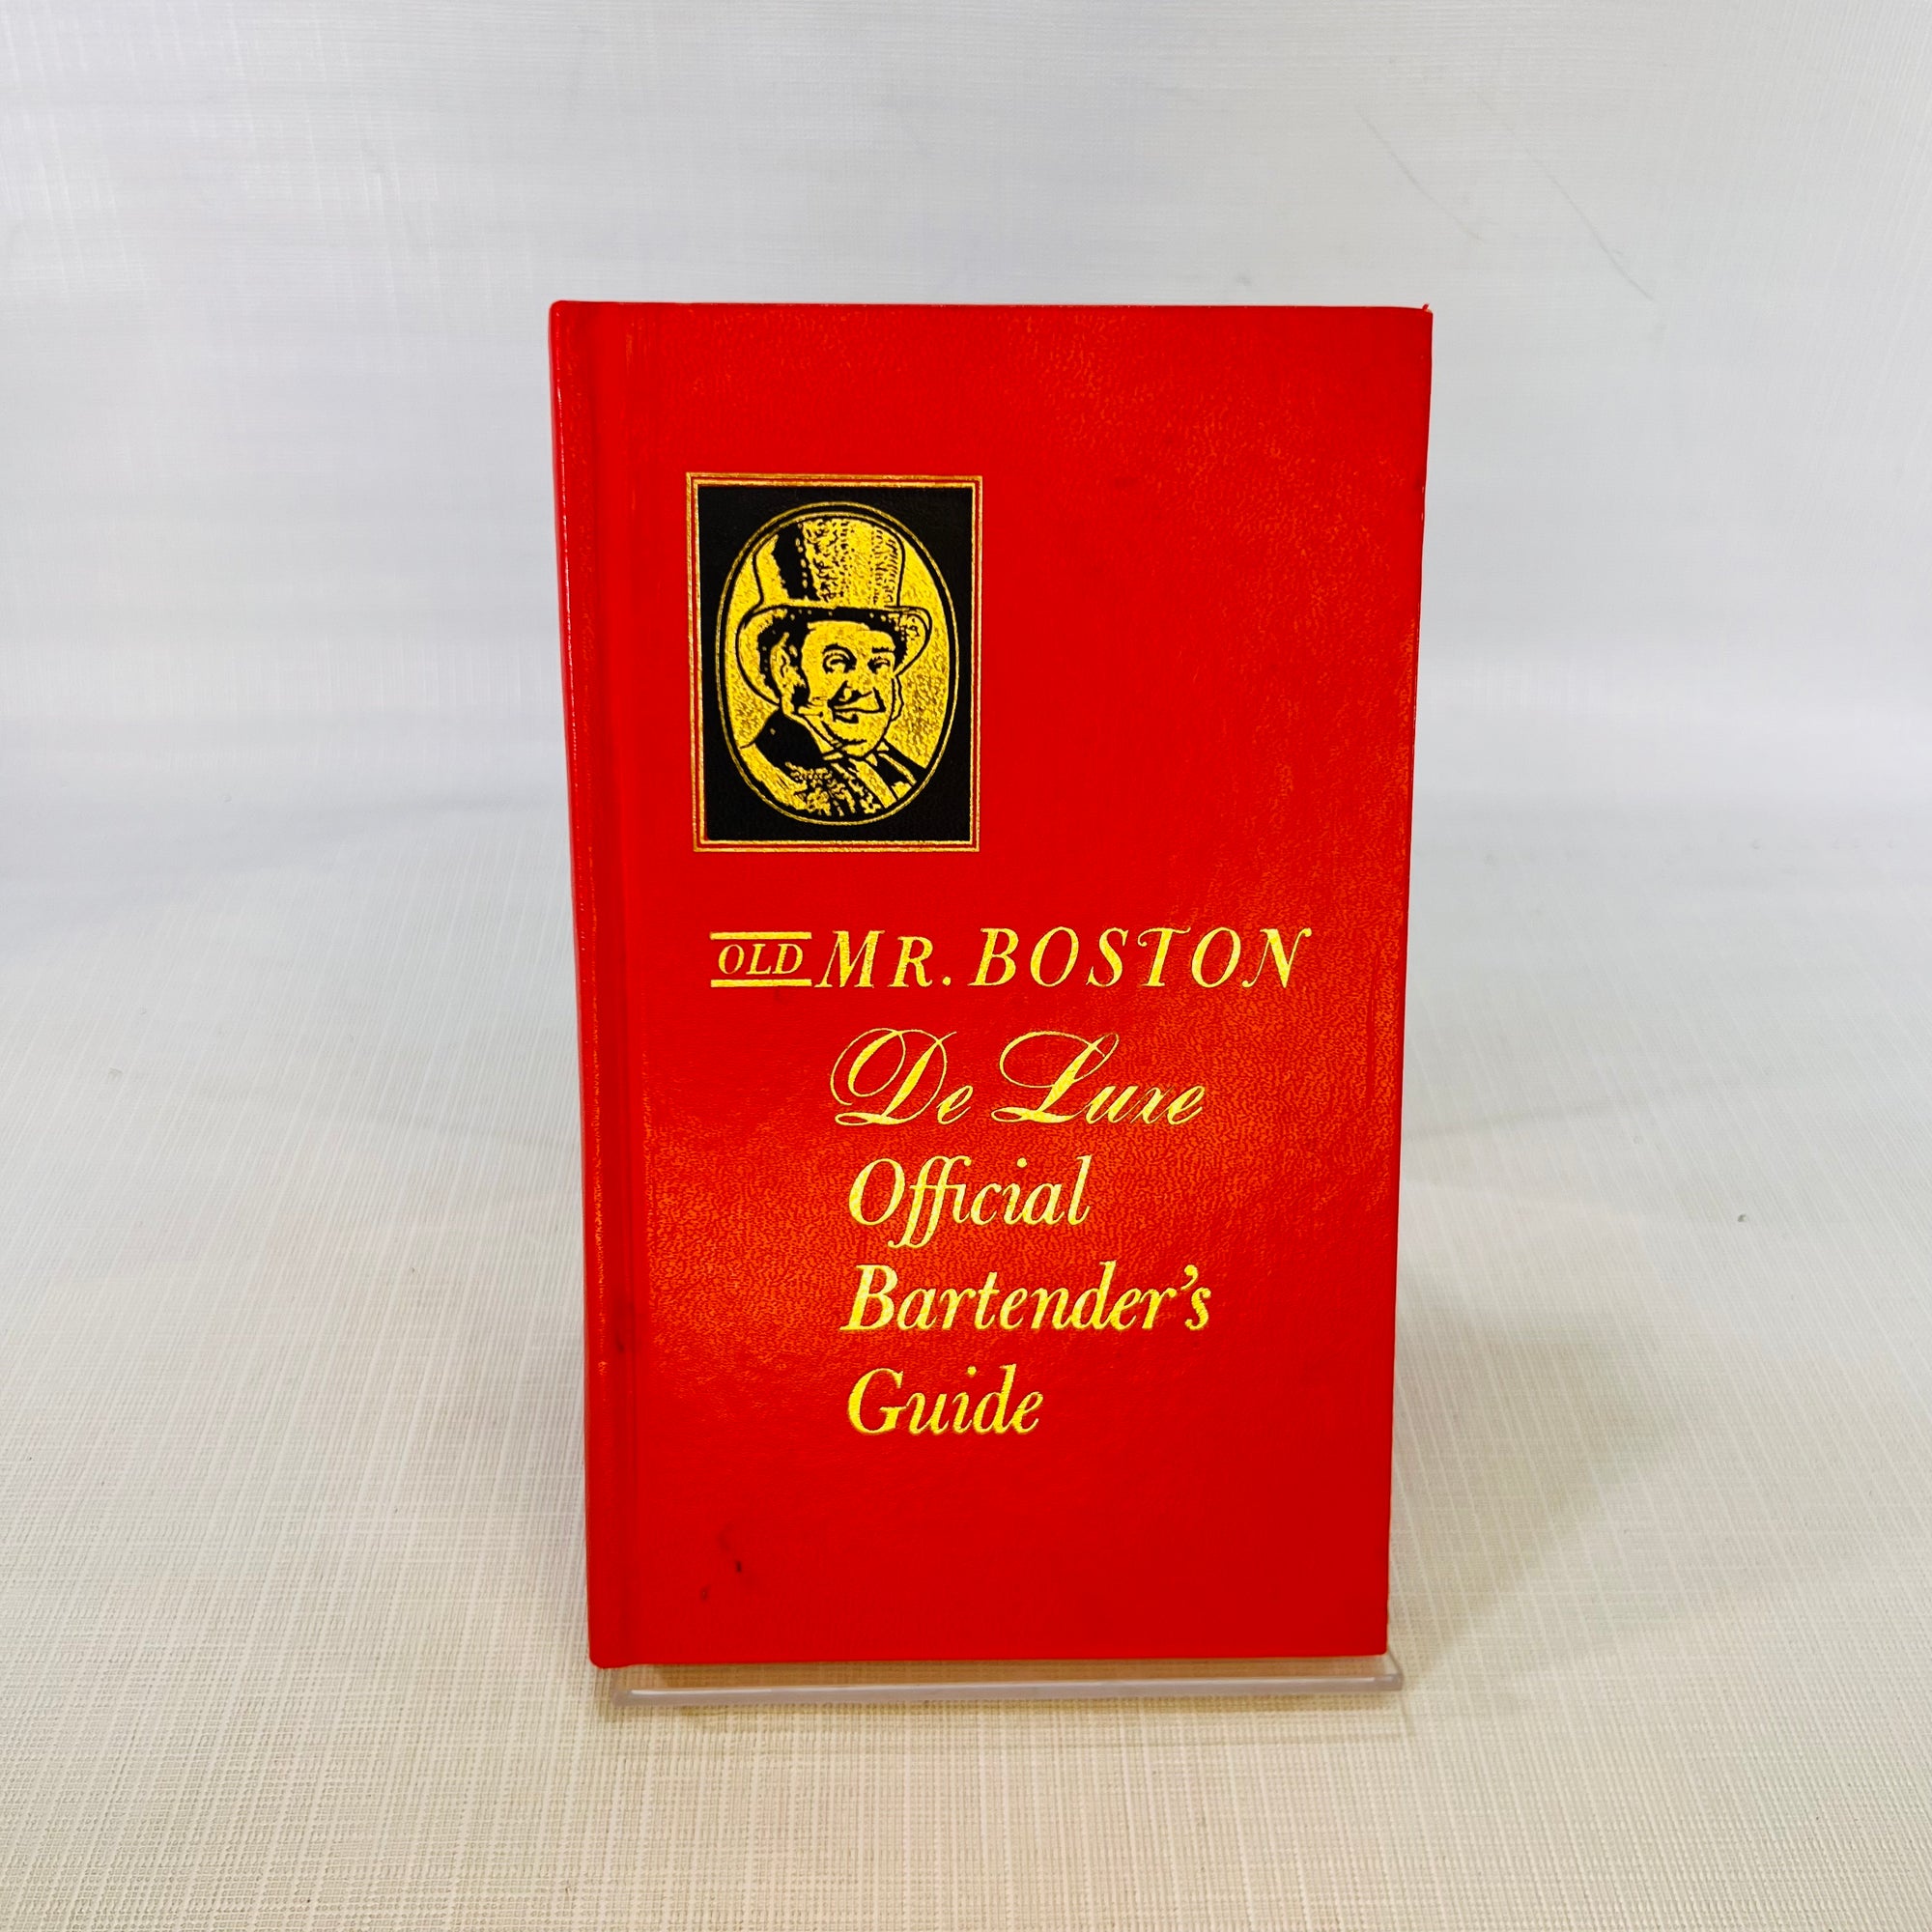 Old Mr. Boston Deluxe Official Bartenders Guide by Mr. Boston Distillers Corp 1967 Vintage Drink Recipe Book